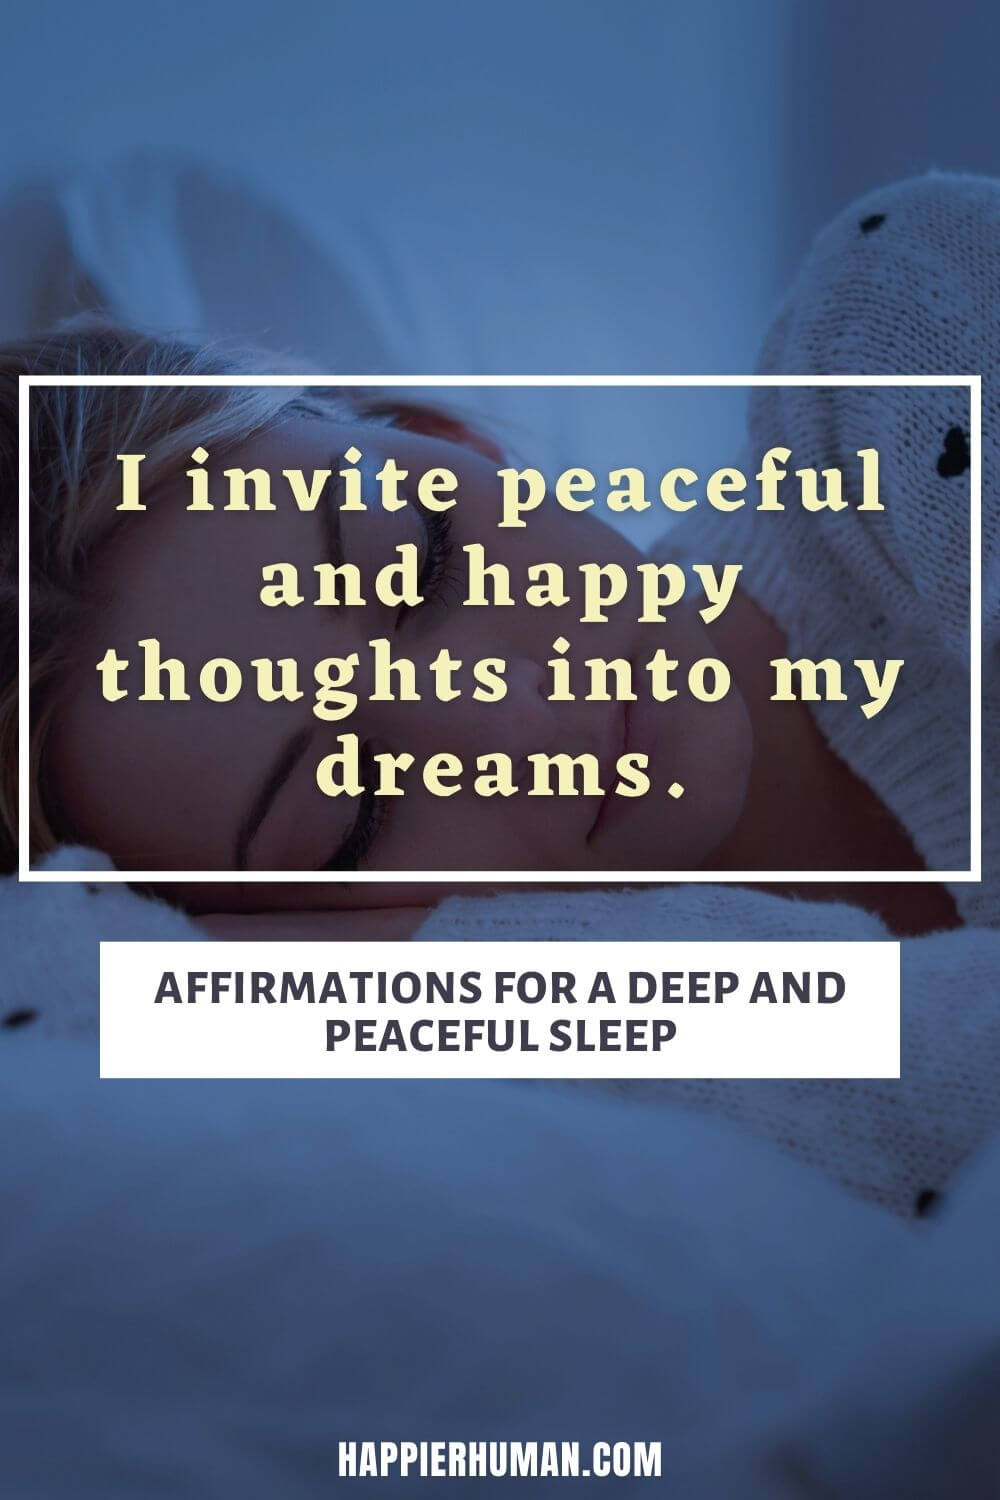 Affirmations for Sleep - I invite peaceful and happy thoughts into my dreams. | sleep affirmations law of attraction | 15 bedtime affirmations | sleep affirmations for healing